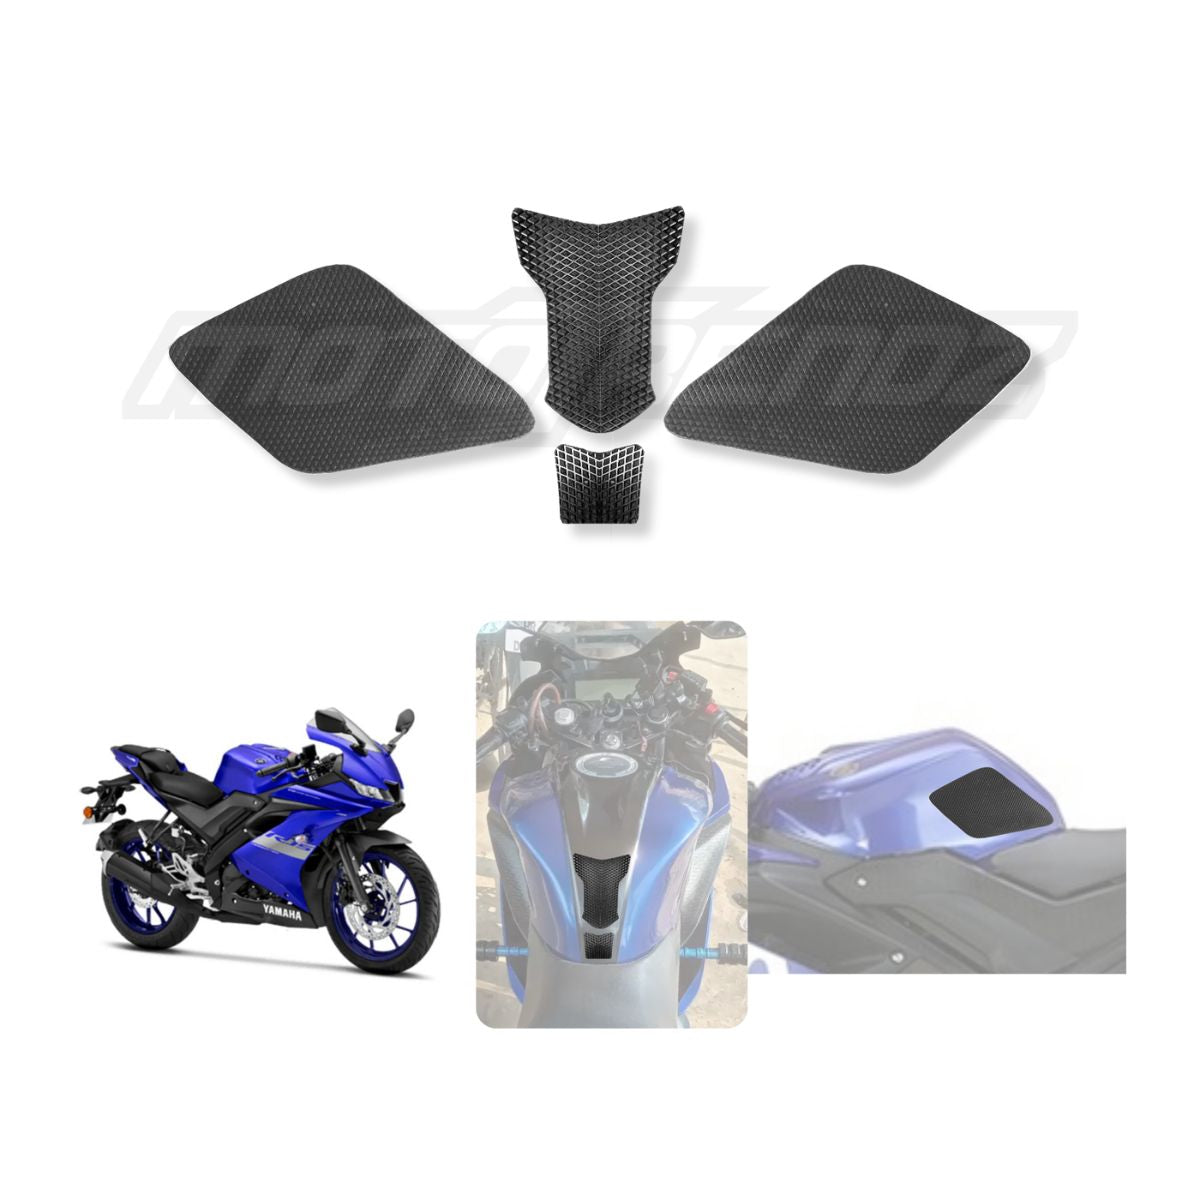 Traction Pads for Yamaha R15 V3 1